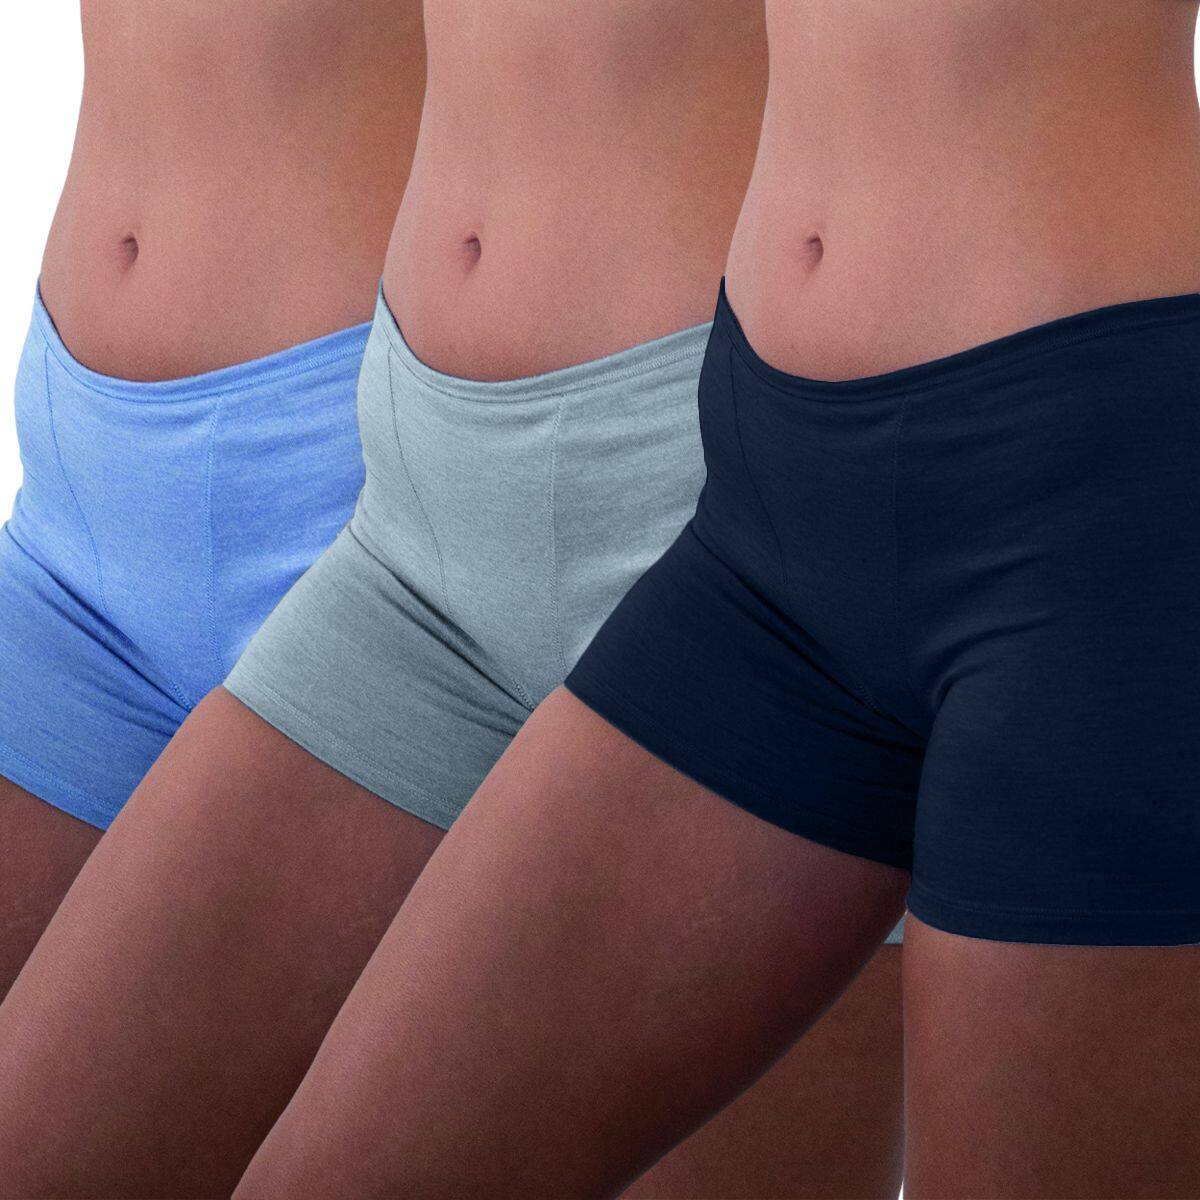 Hanes Women's Boxer Briefs 6 for $12 + Free Shipping